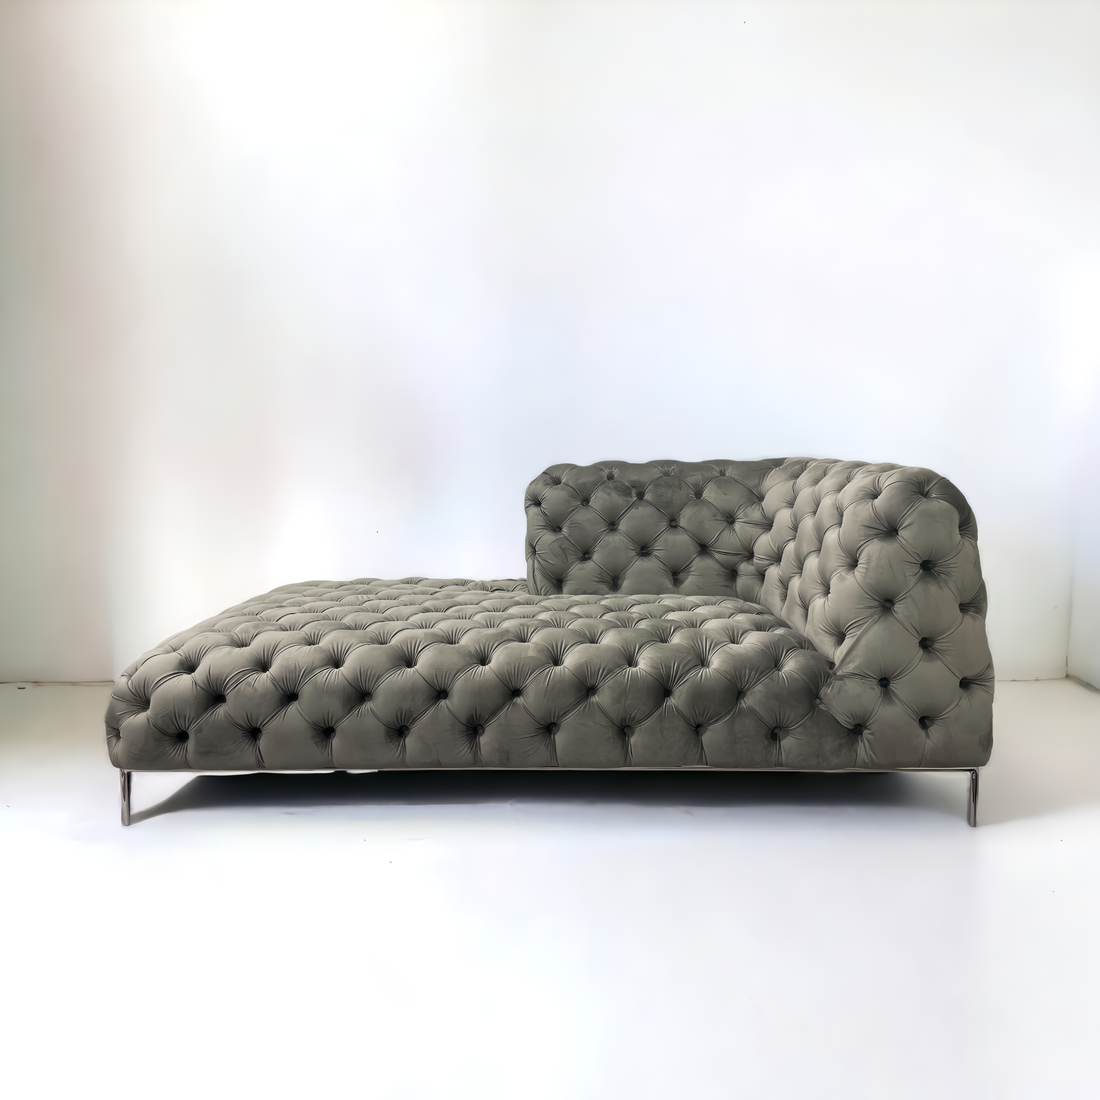 ENT COUCH SOFA GREYISH OLIVE